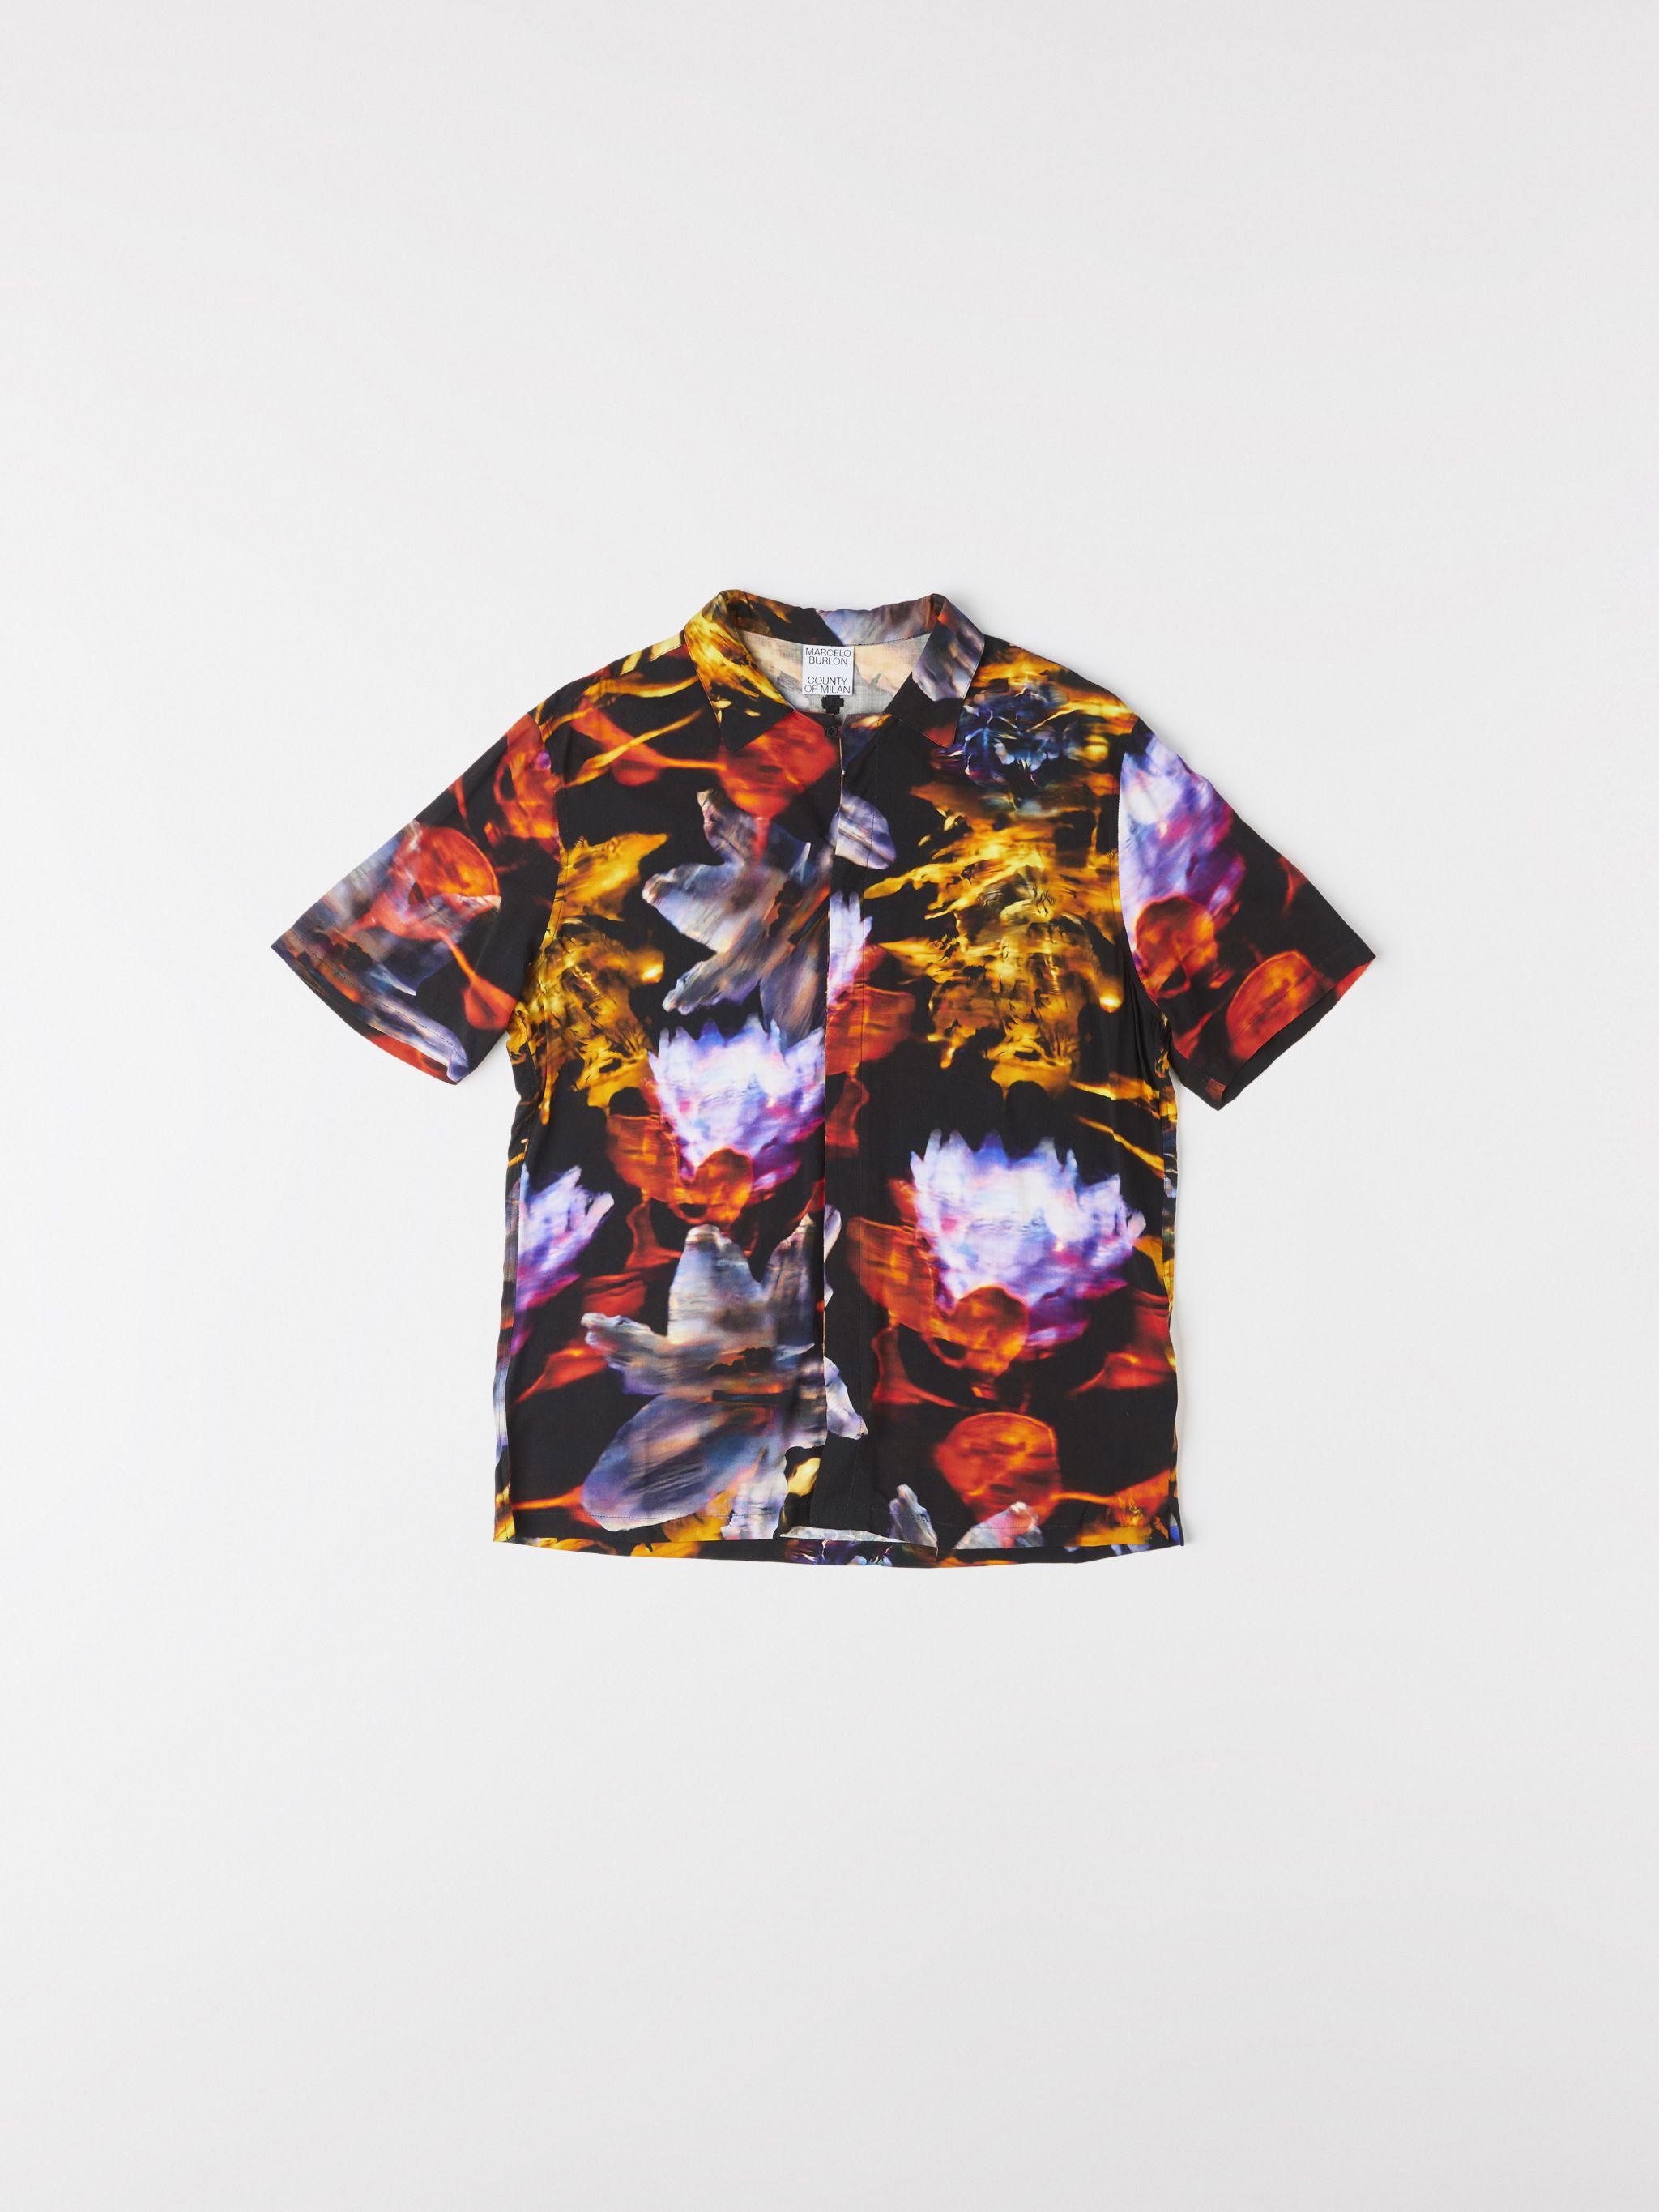 Black/multicolour graphic Flowers print shirt from Marcelo Burlon County of Milan featuring all-over floral print, classic collar, concealed front fastening, short sleeves and straight hem.